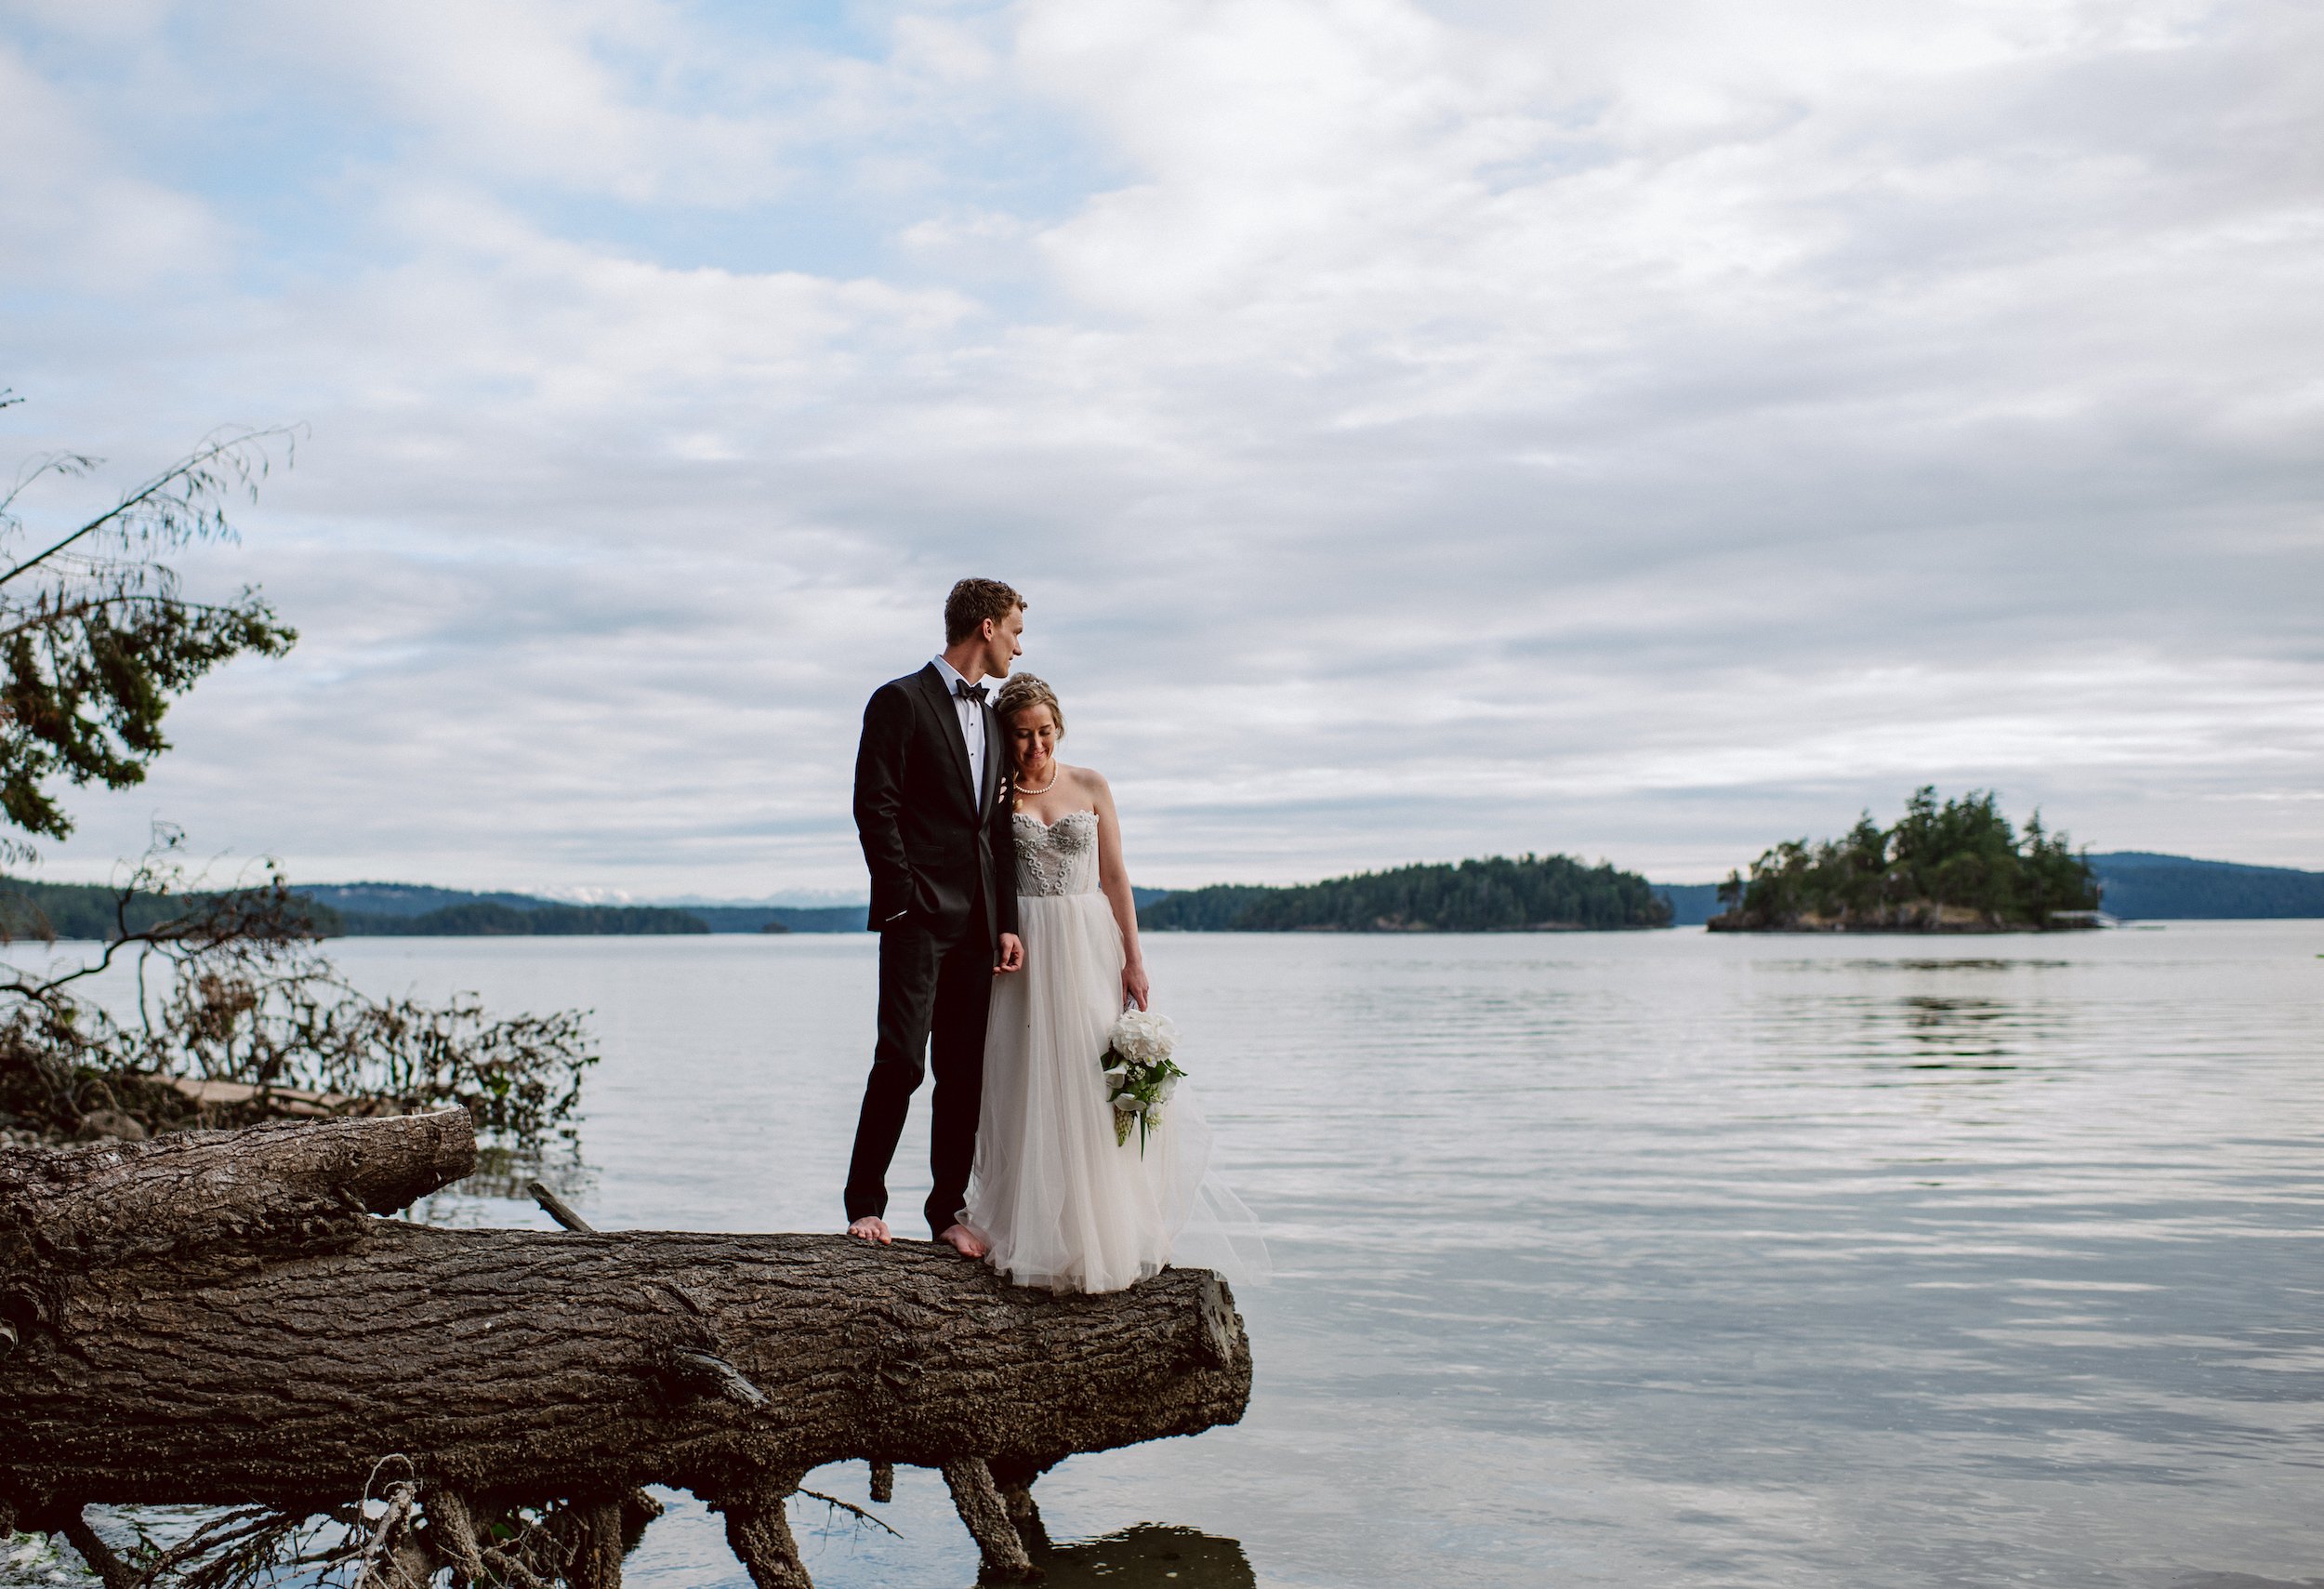 Groom and bride standing on log with ocean and islands behind them and mountains in the distance